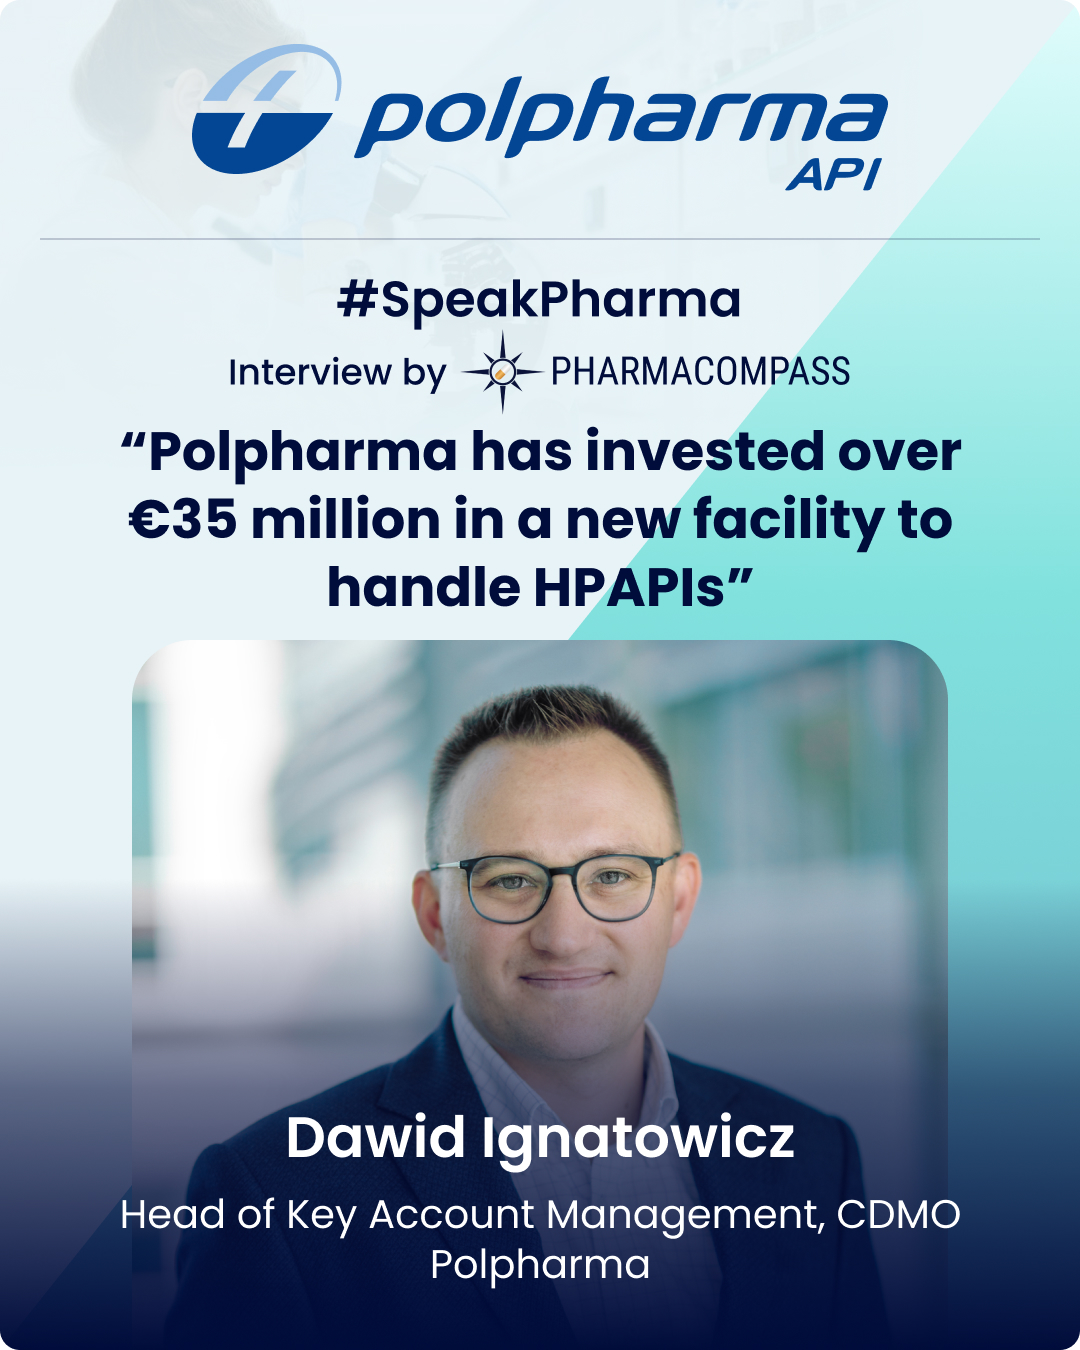 “Polpharma has invested over €35 million in a new facility to handle HPAPIs”